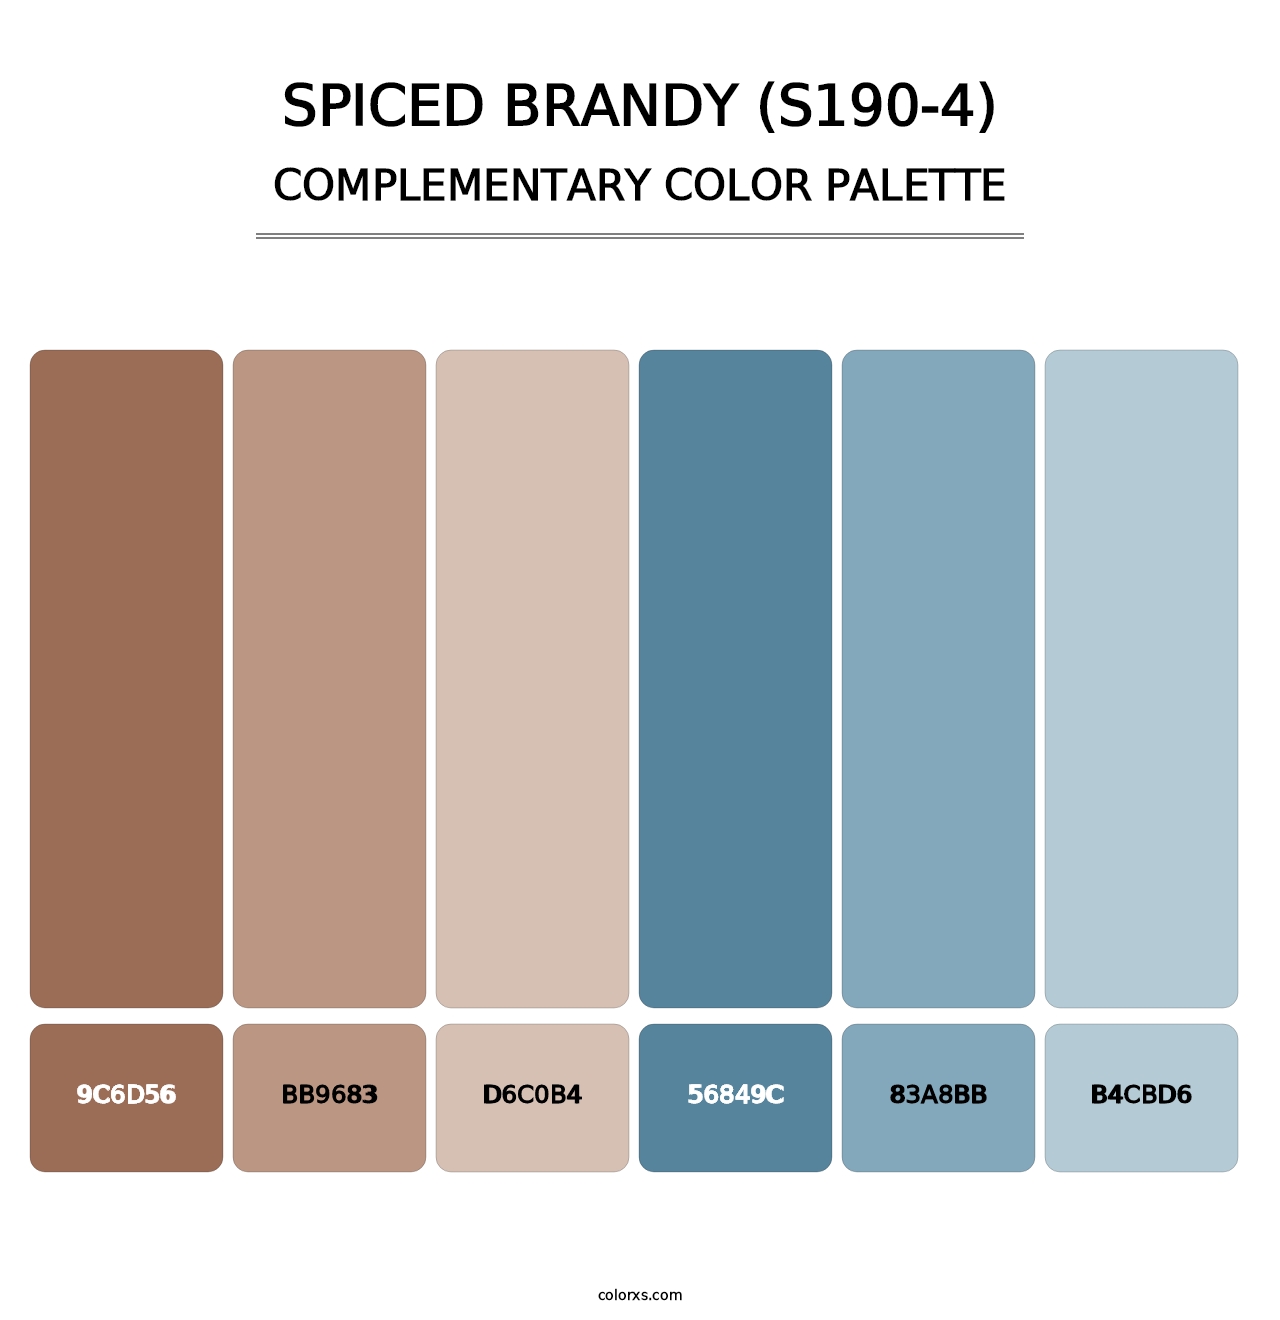 Spiced Brandy (S190-4) - Complementary Color Palette